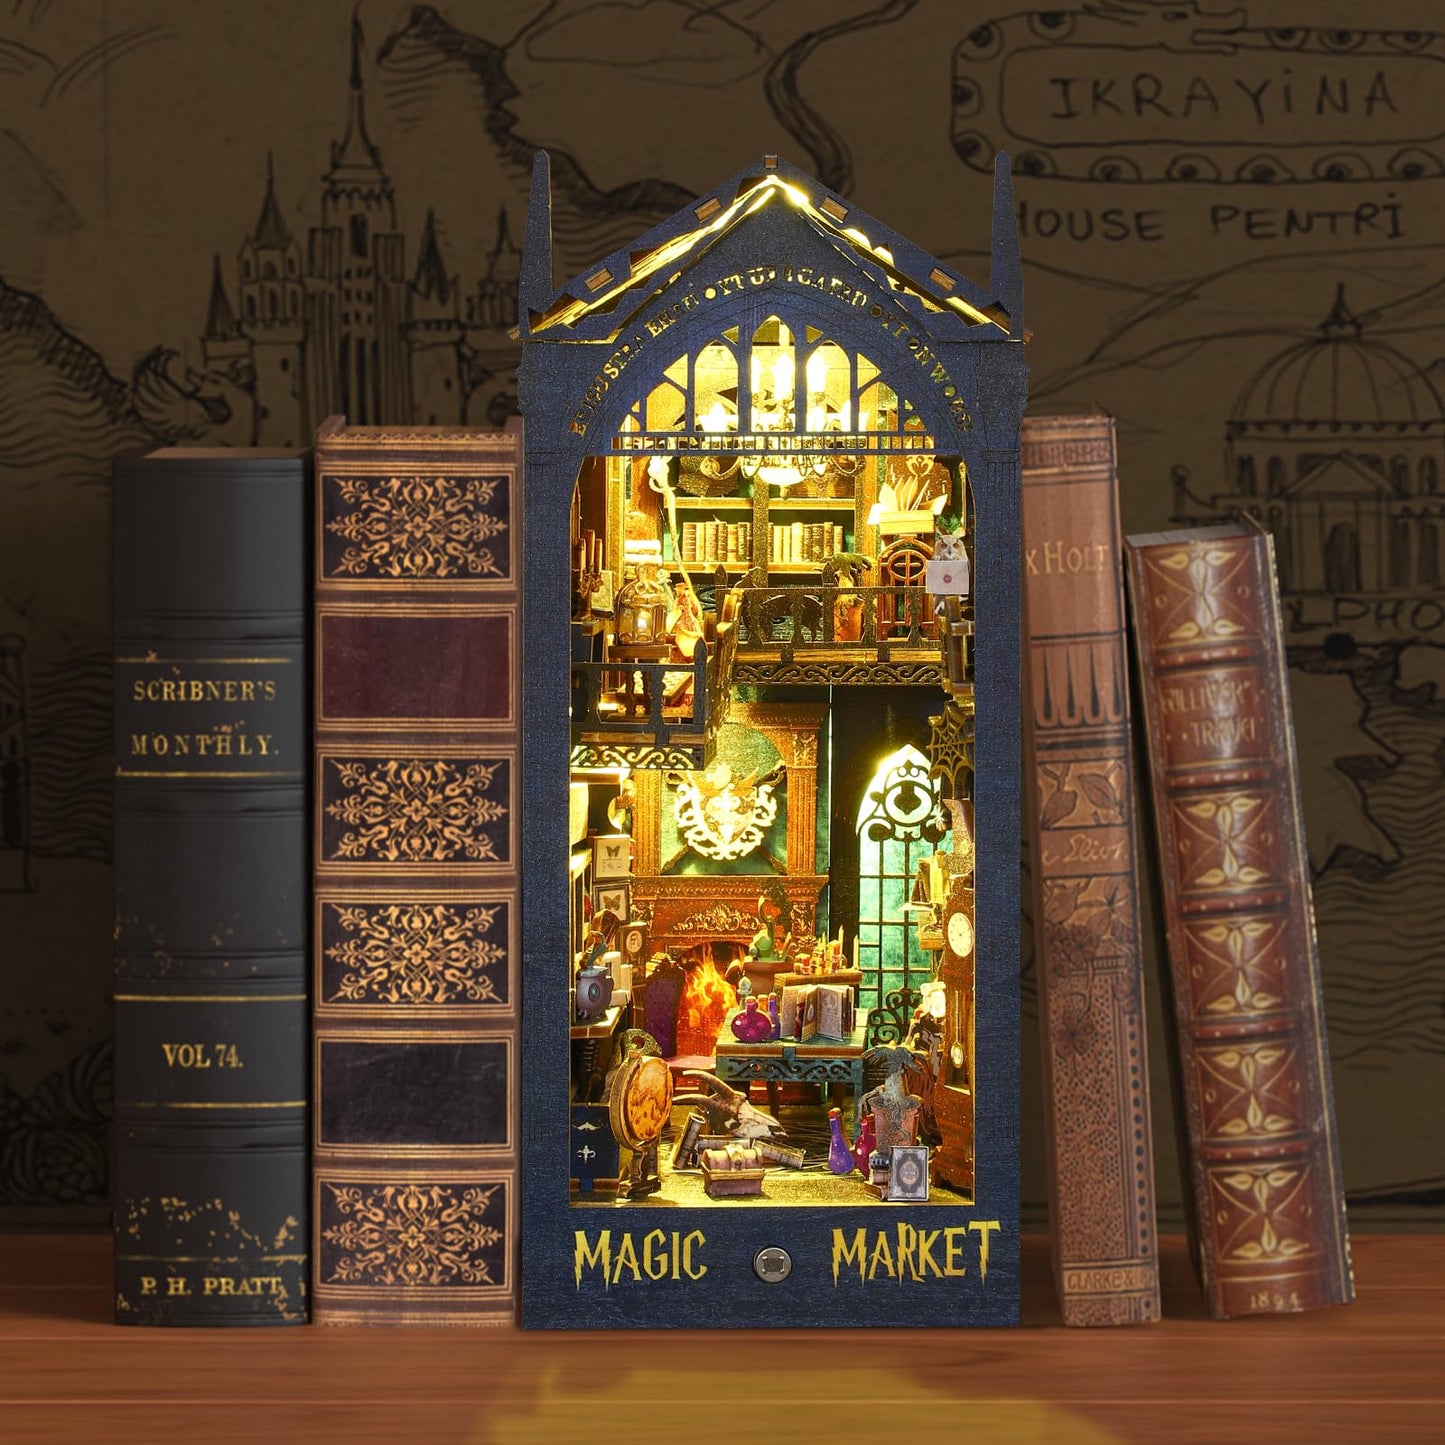 DIY Book Nook Kit, 3D Wooden Miniature Puzzles with LED Light Dollhouse Model Craft Kits for Adults Ideal Bookshelf Insert Decor Birthday Gifts for